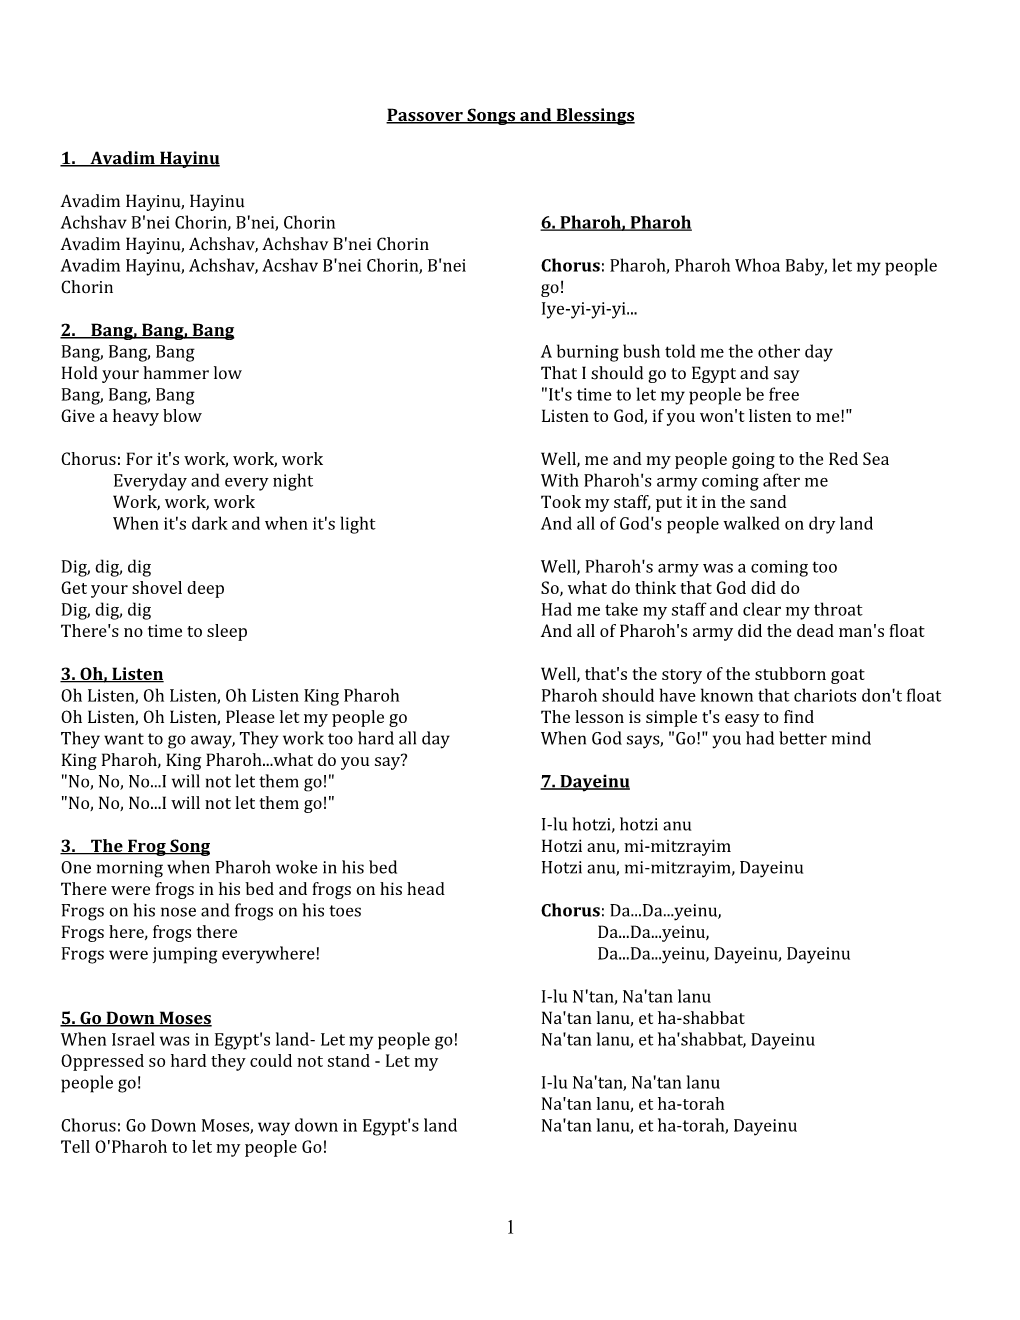 A PDF of Passover Songs and Blessings